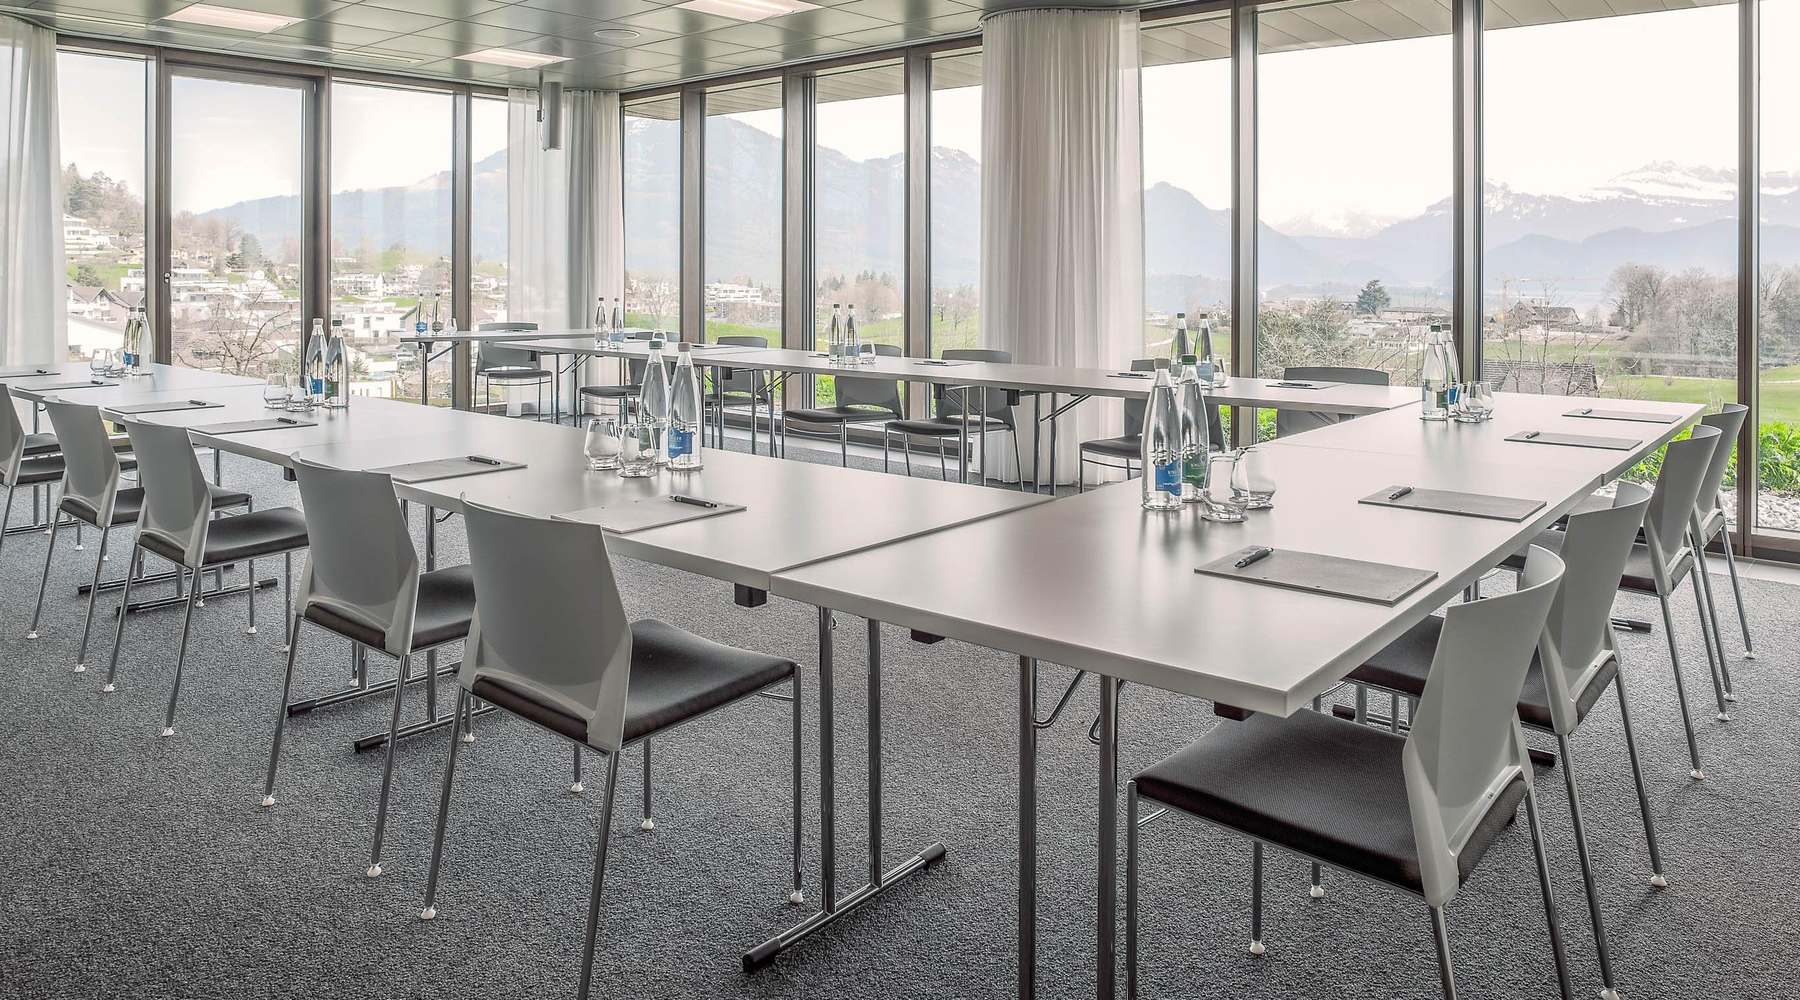 <span class='cycle-icon MEETINGS'></span><span class='cycle-title'>MEETINGS</span><span class='cycle-subtitle'>The modern seminar rooms offer the best conditions for successful seminars, meetings and presentations</span>